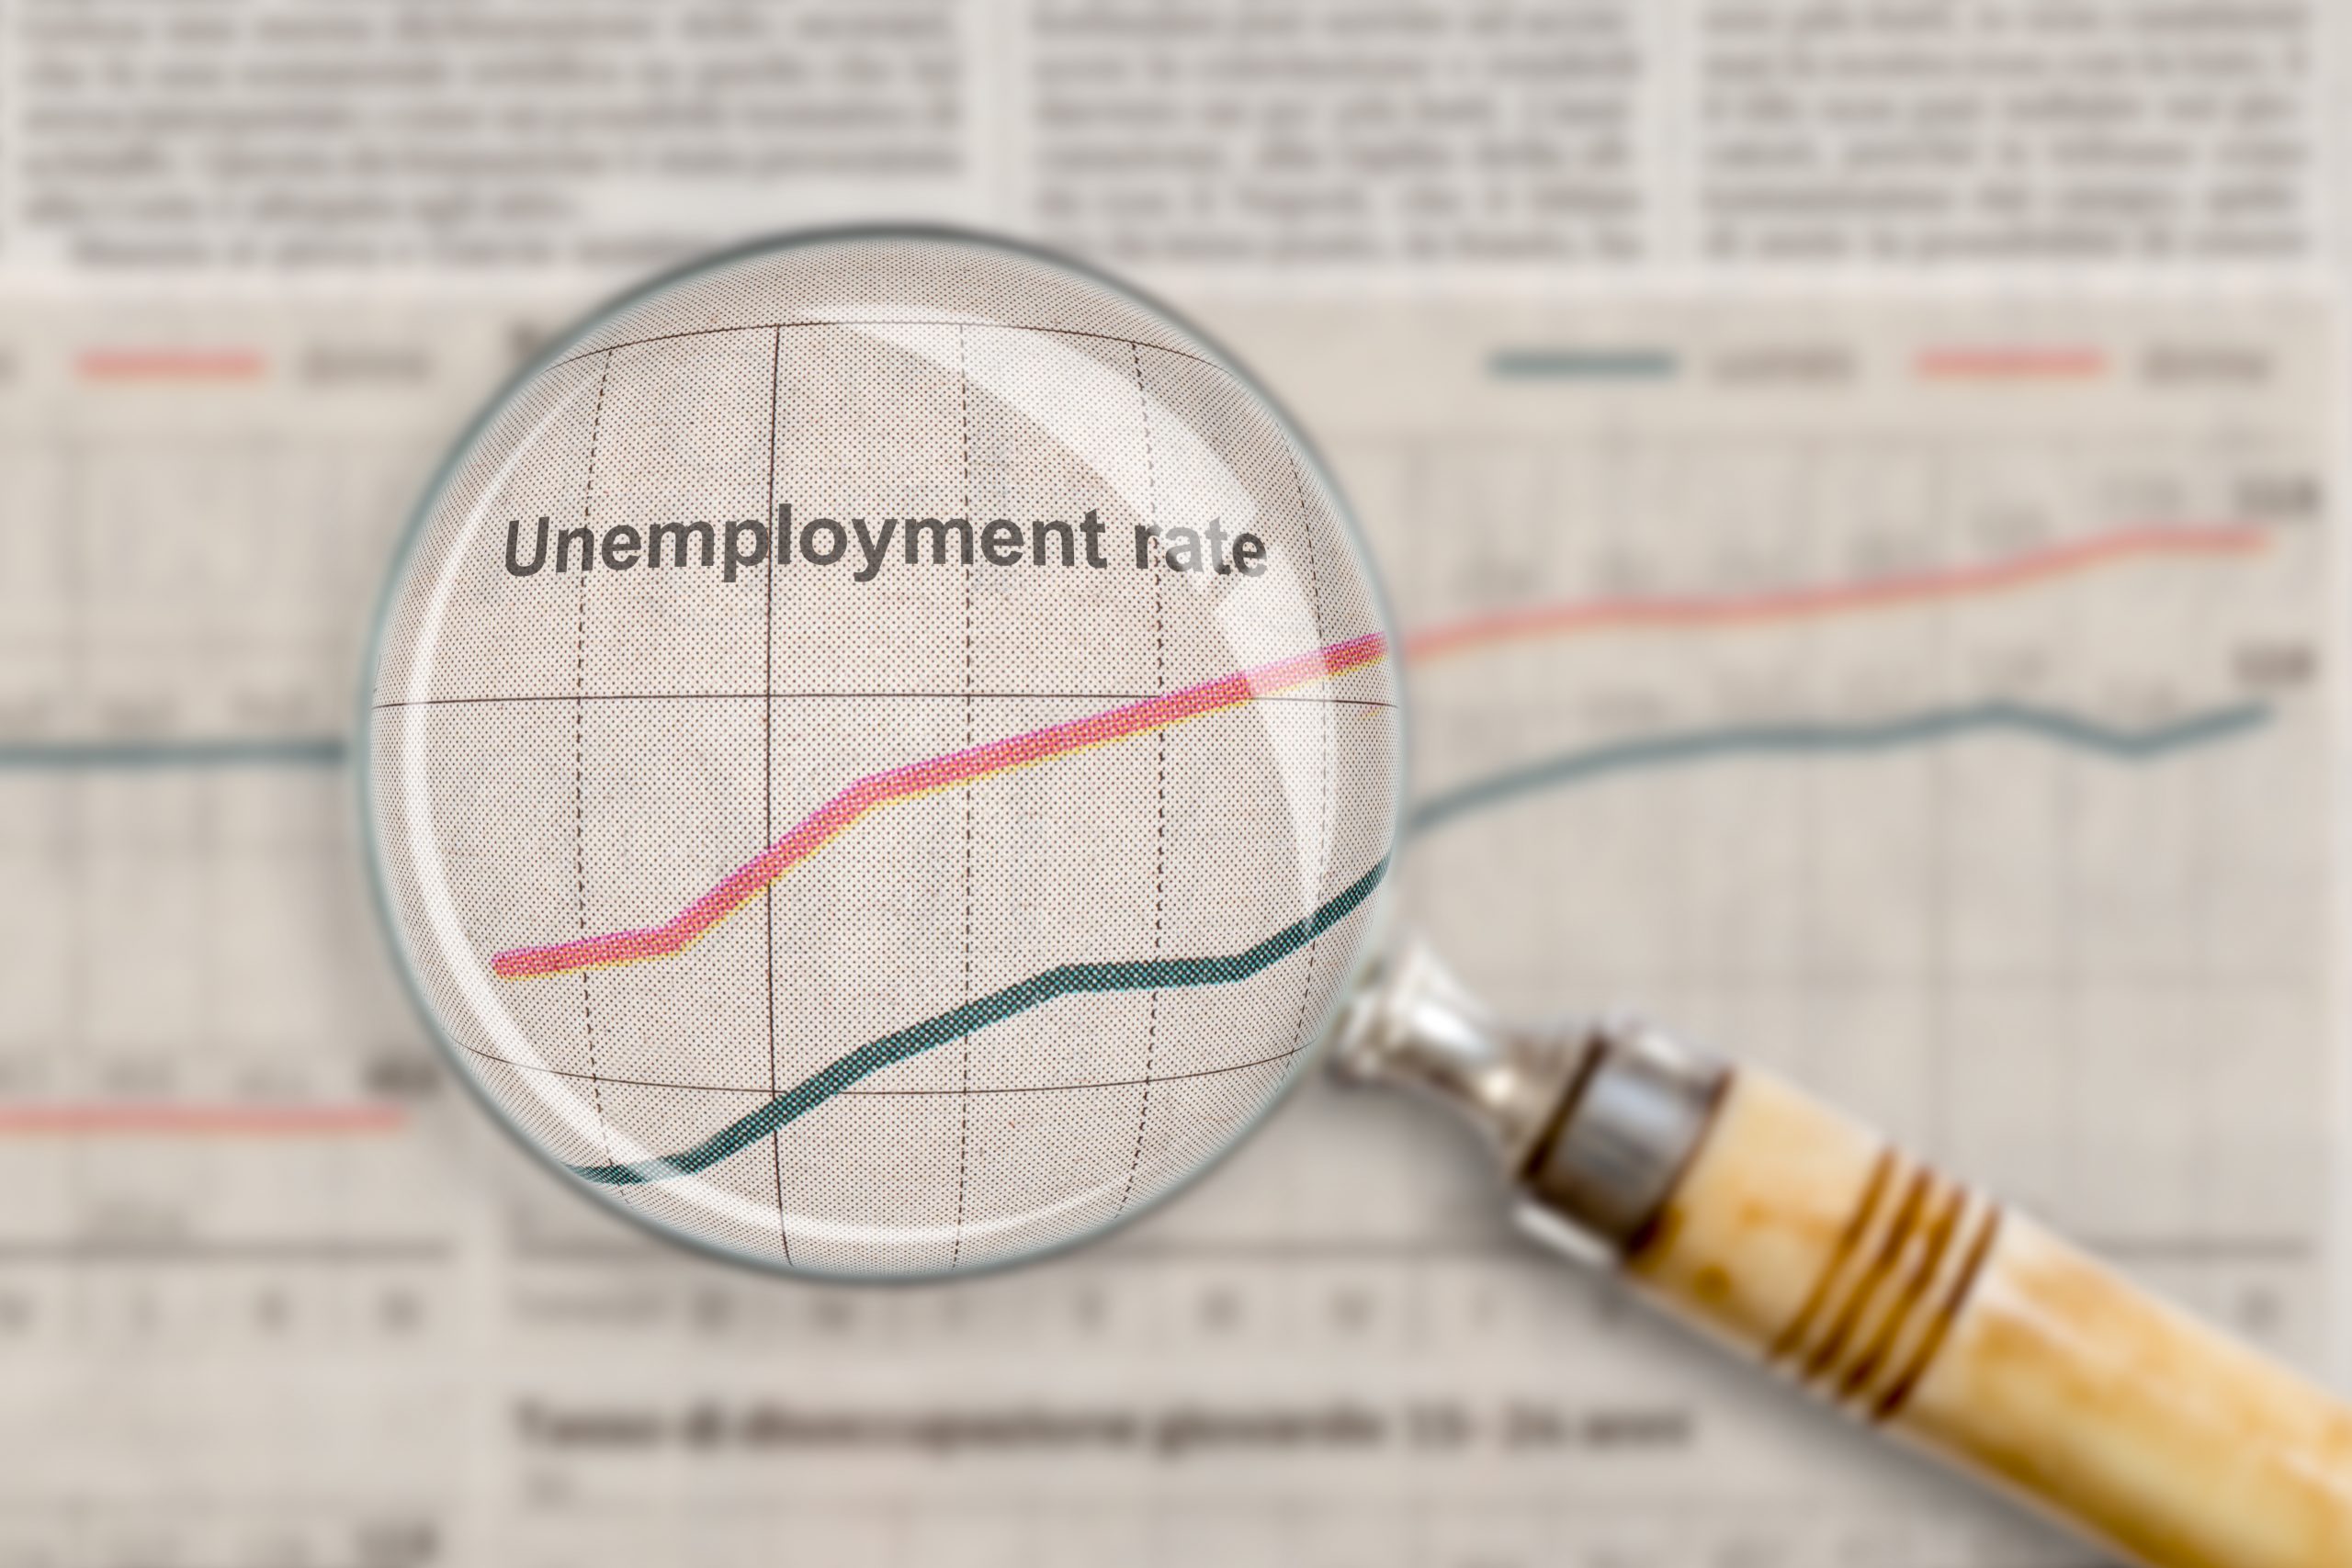 Unemployment rate in Macao increases to 3.5 per cent in first quarter of 2022